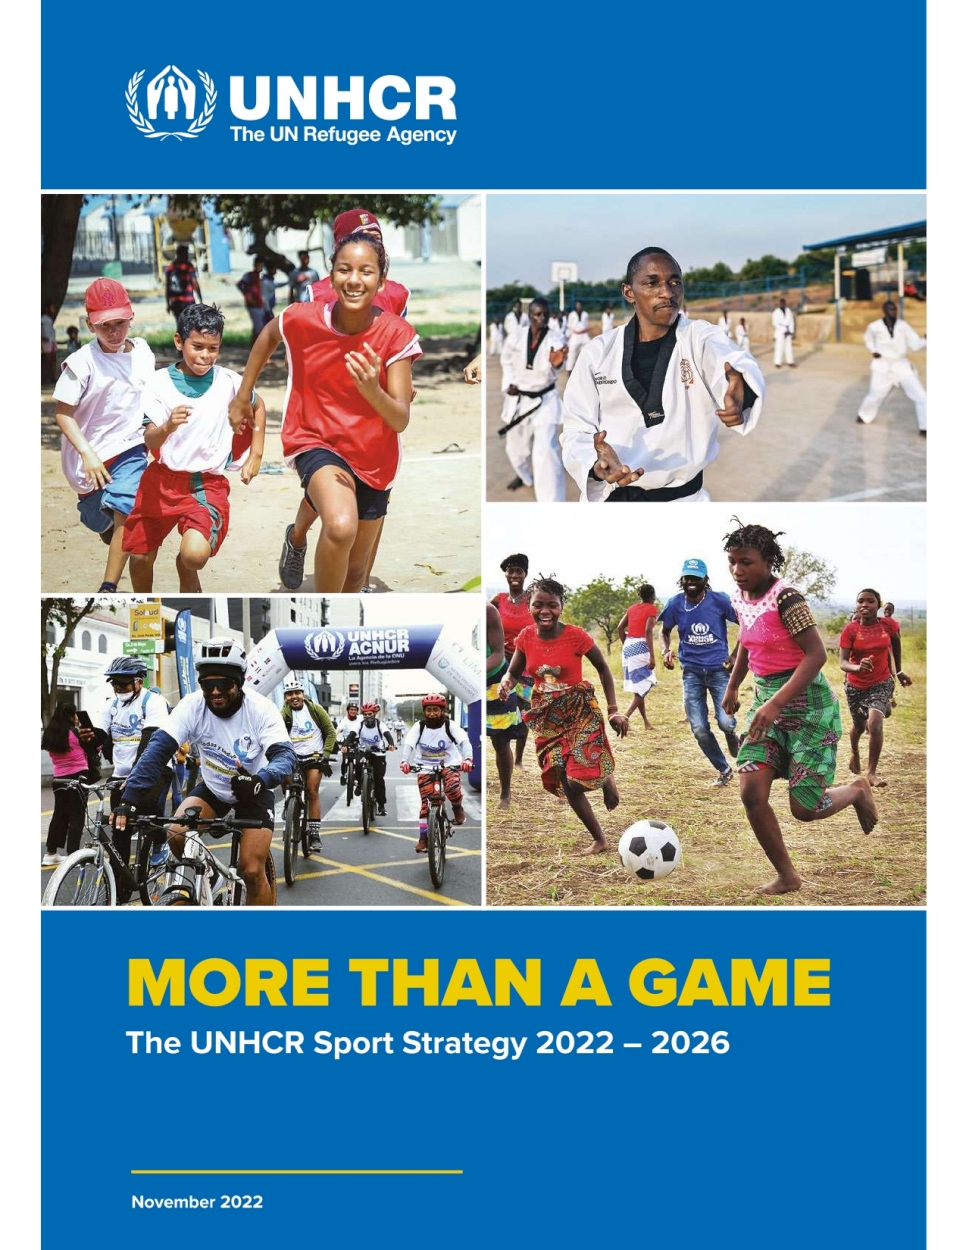 Cover of the UNHCR Sport Strategy, featuring multiple photos of children and young people playing sport. 